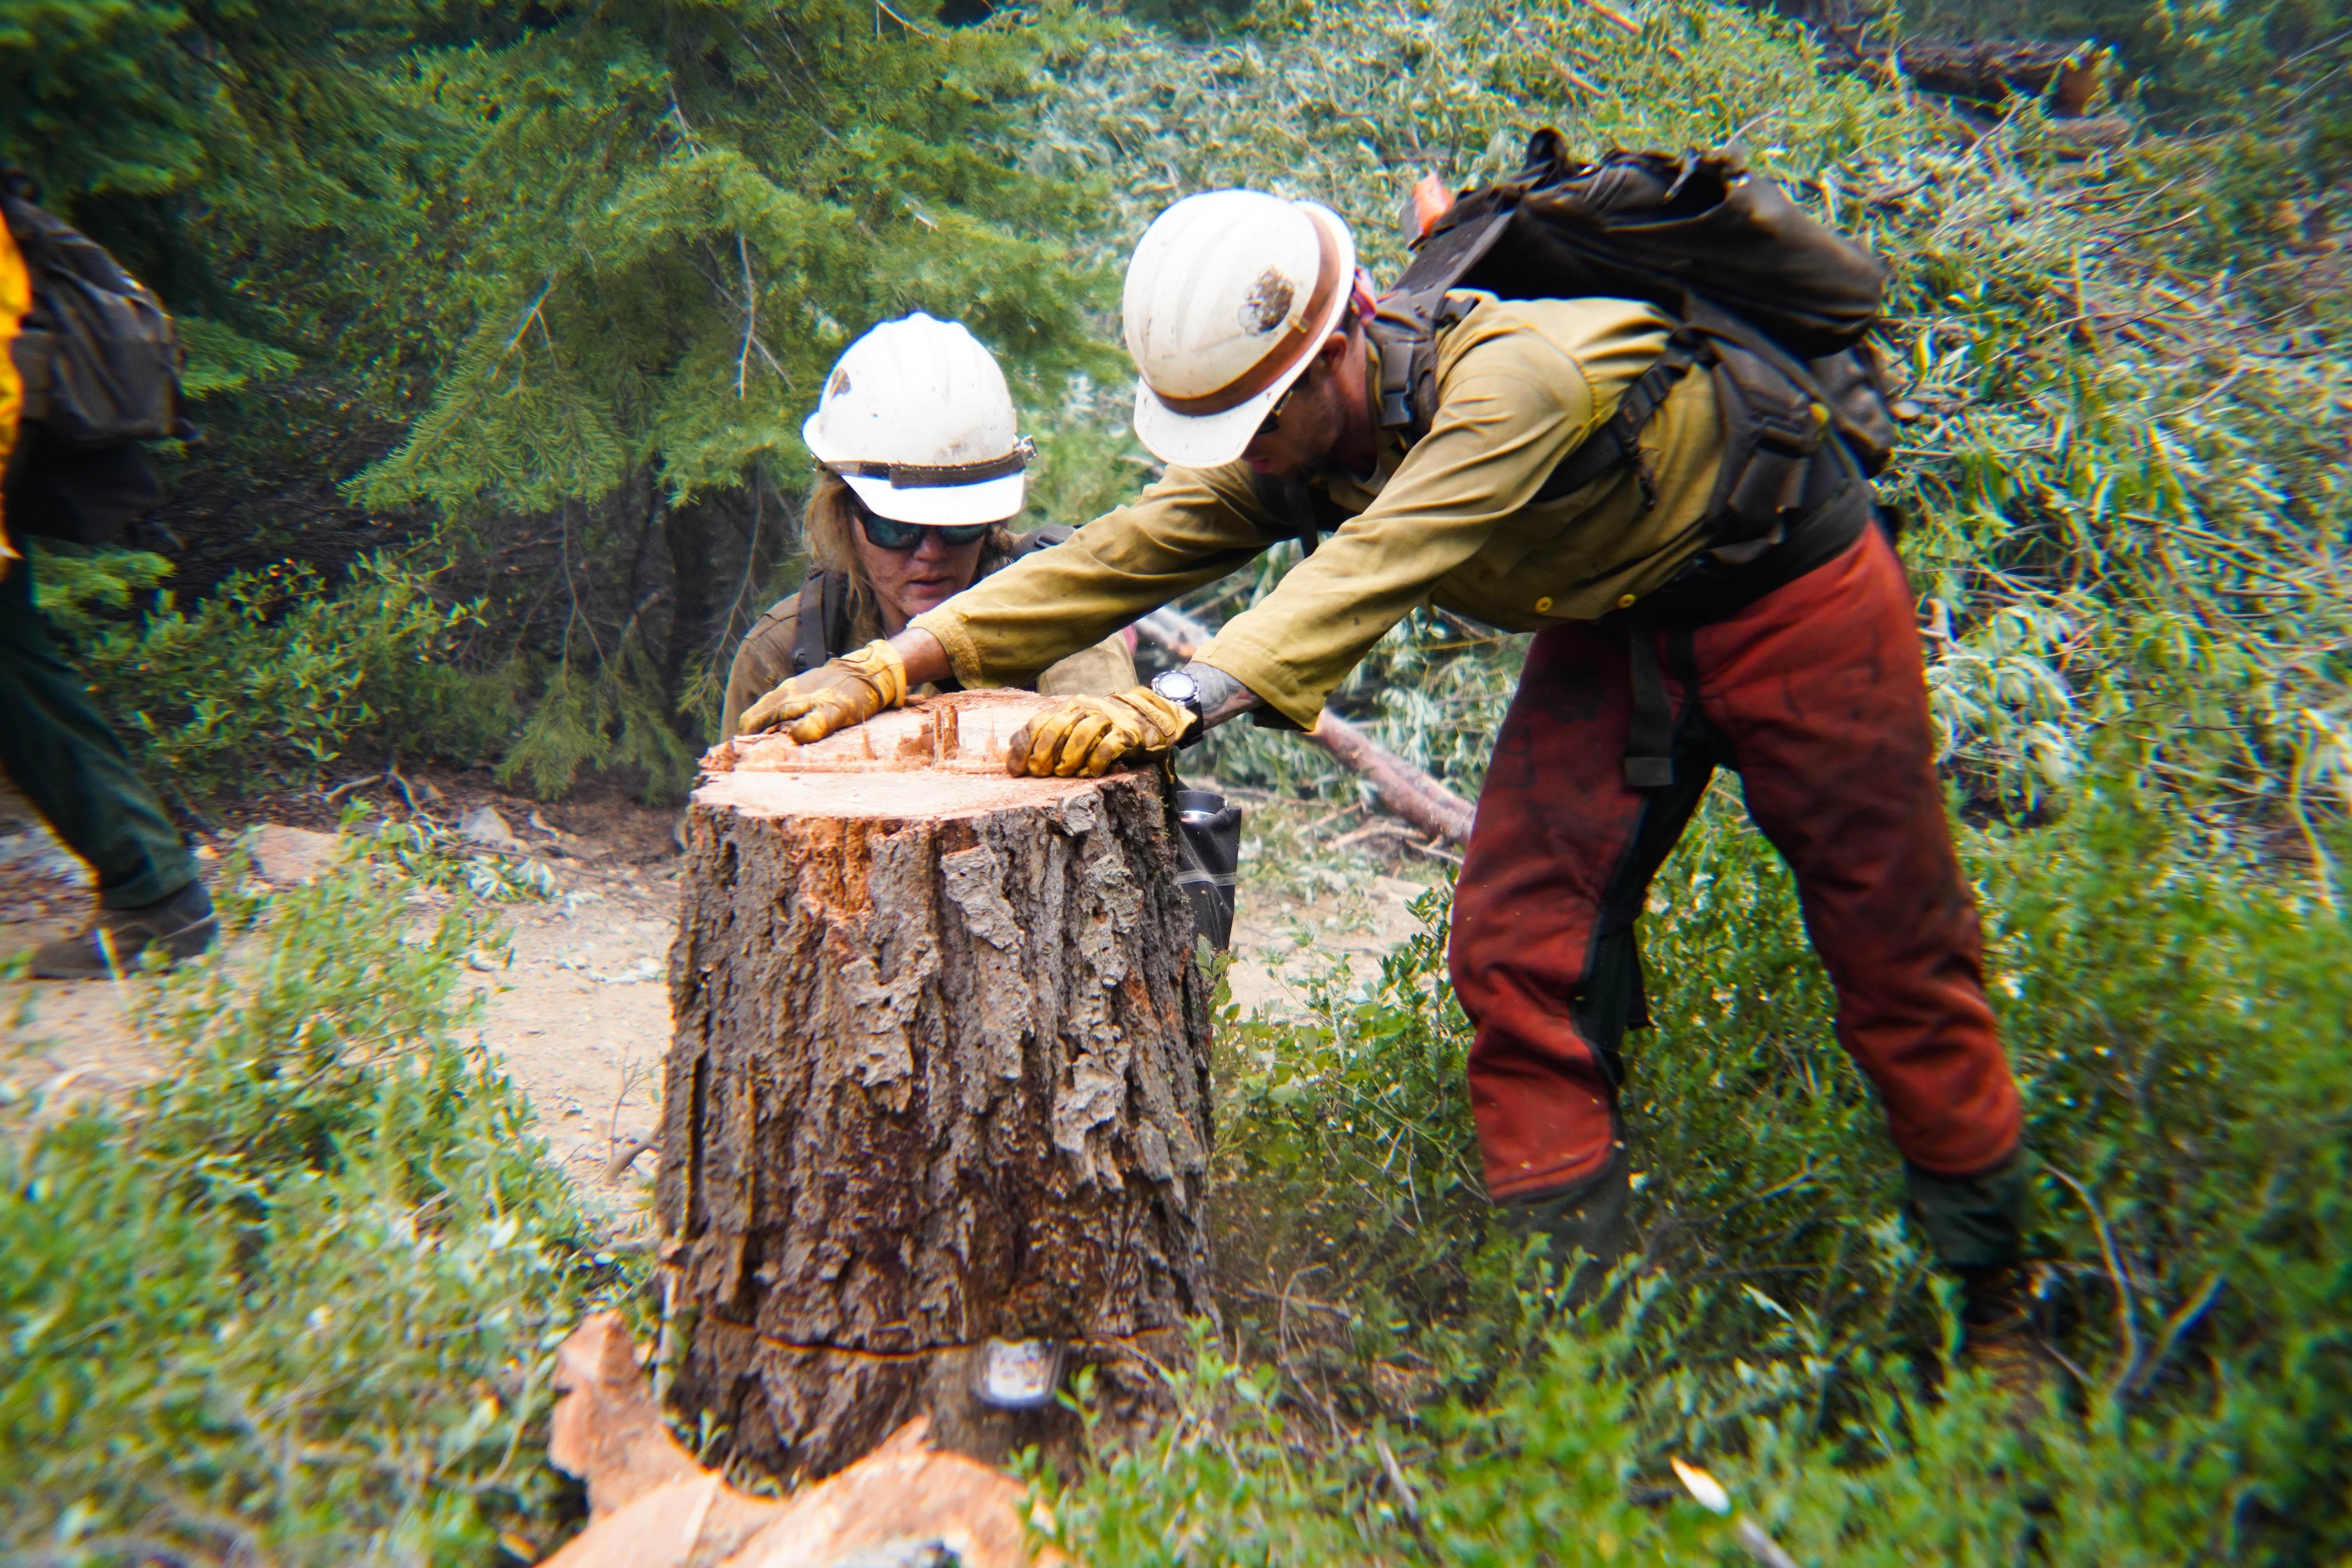 Crews with Firestorm Wildland Fire Suppression, Inc, works providing structure defense for residents of Coffee Creek, Aug 15, 2021, on the River Complex Fire. (U.S. Forest Service photo courtesy of Benjamin Cossel)